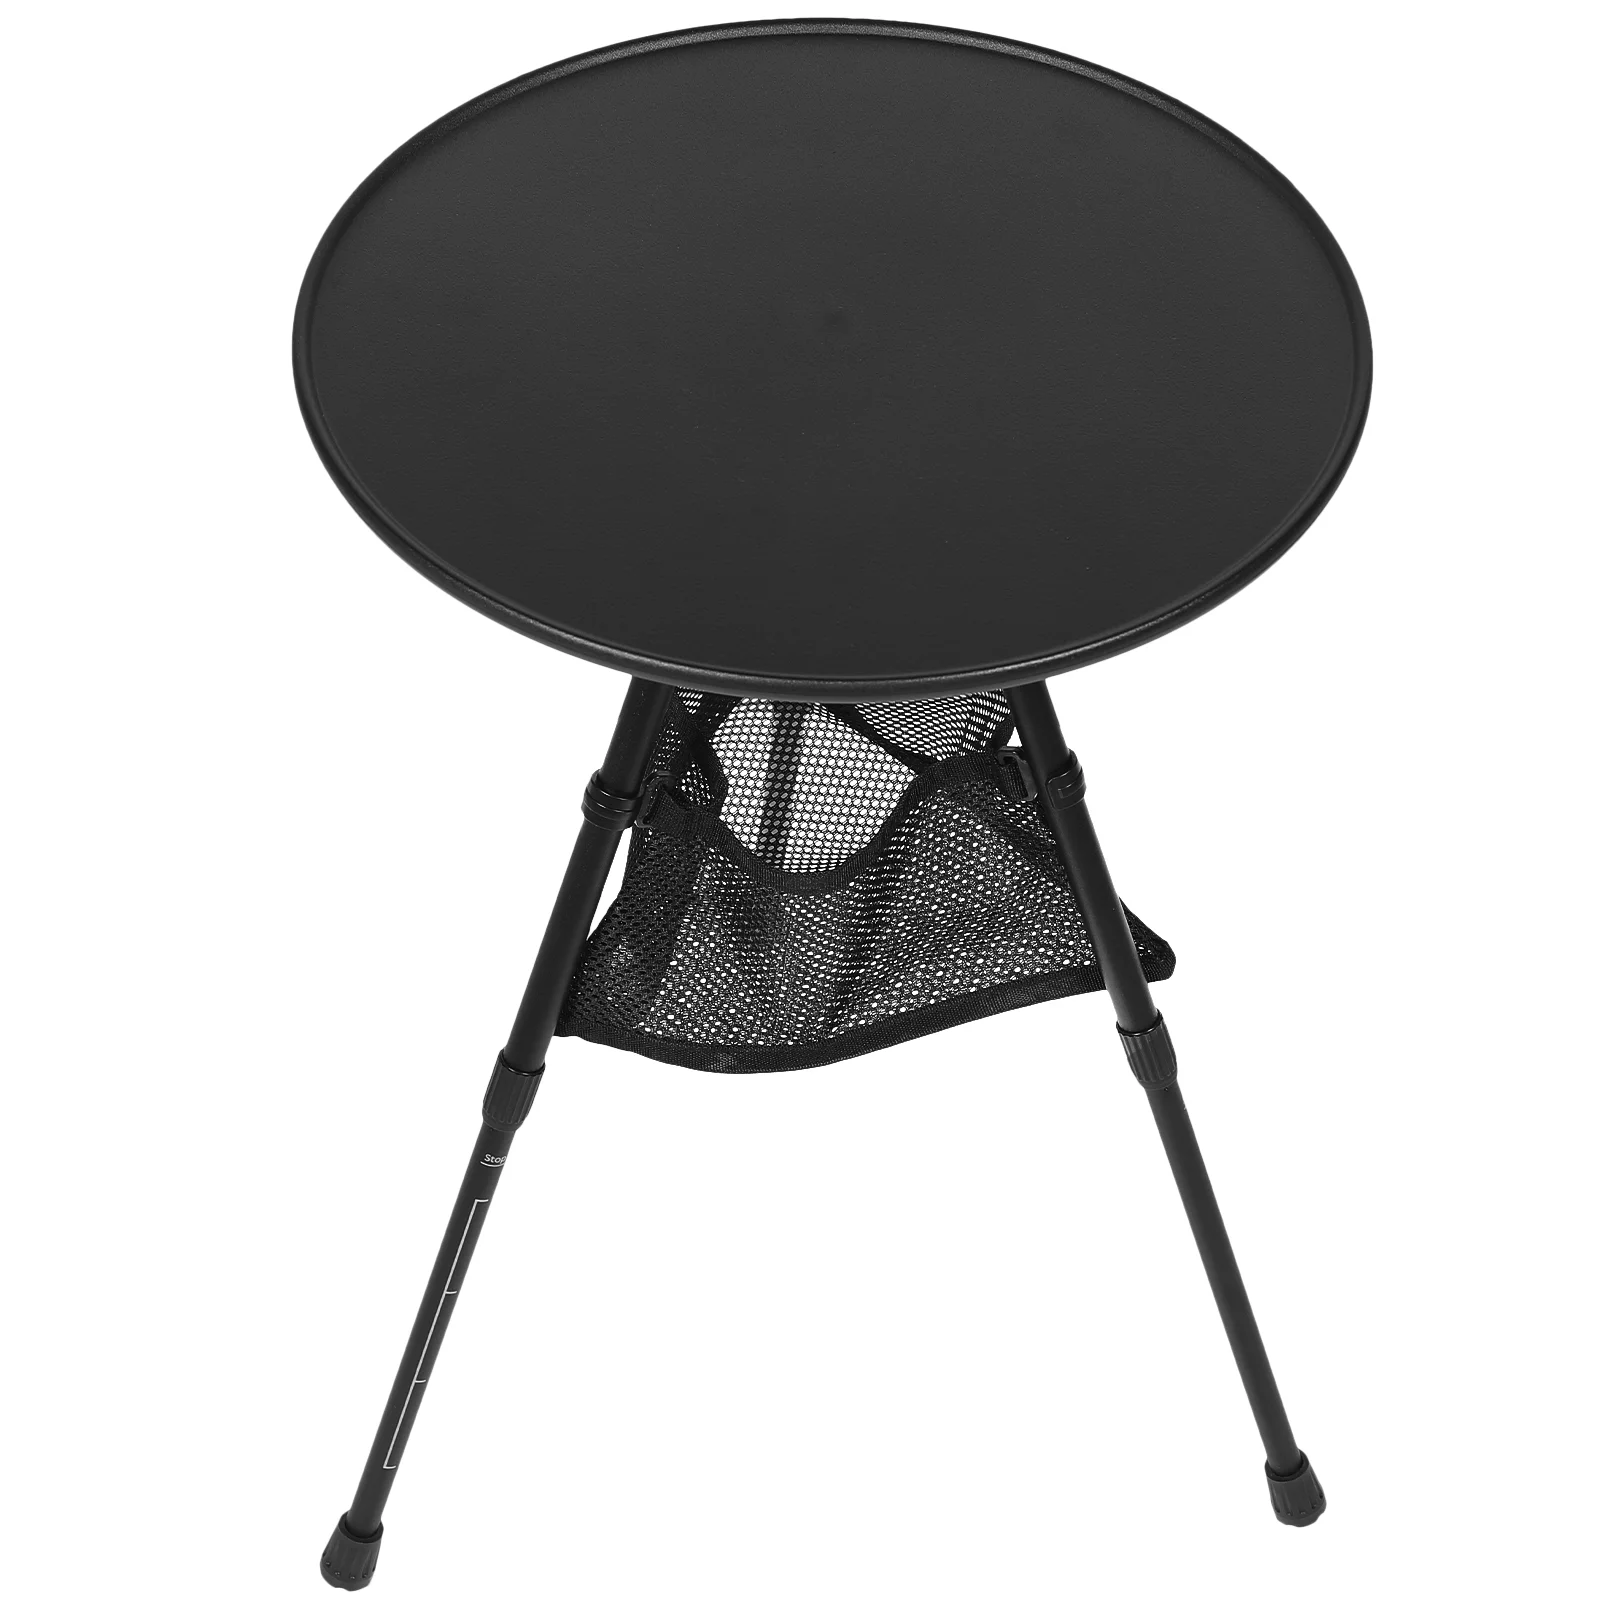 

Table Camping Folding Picnic Foldable Desk Beach Round Tables Side Travel Aluminum Furniture Lightweight Backyard Sand Camper